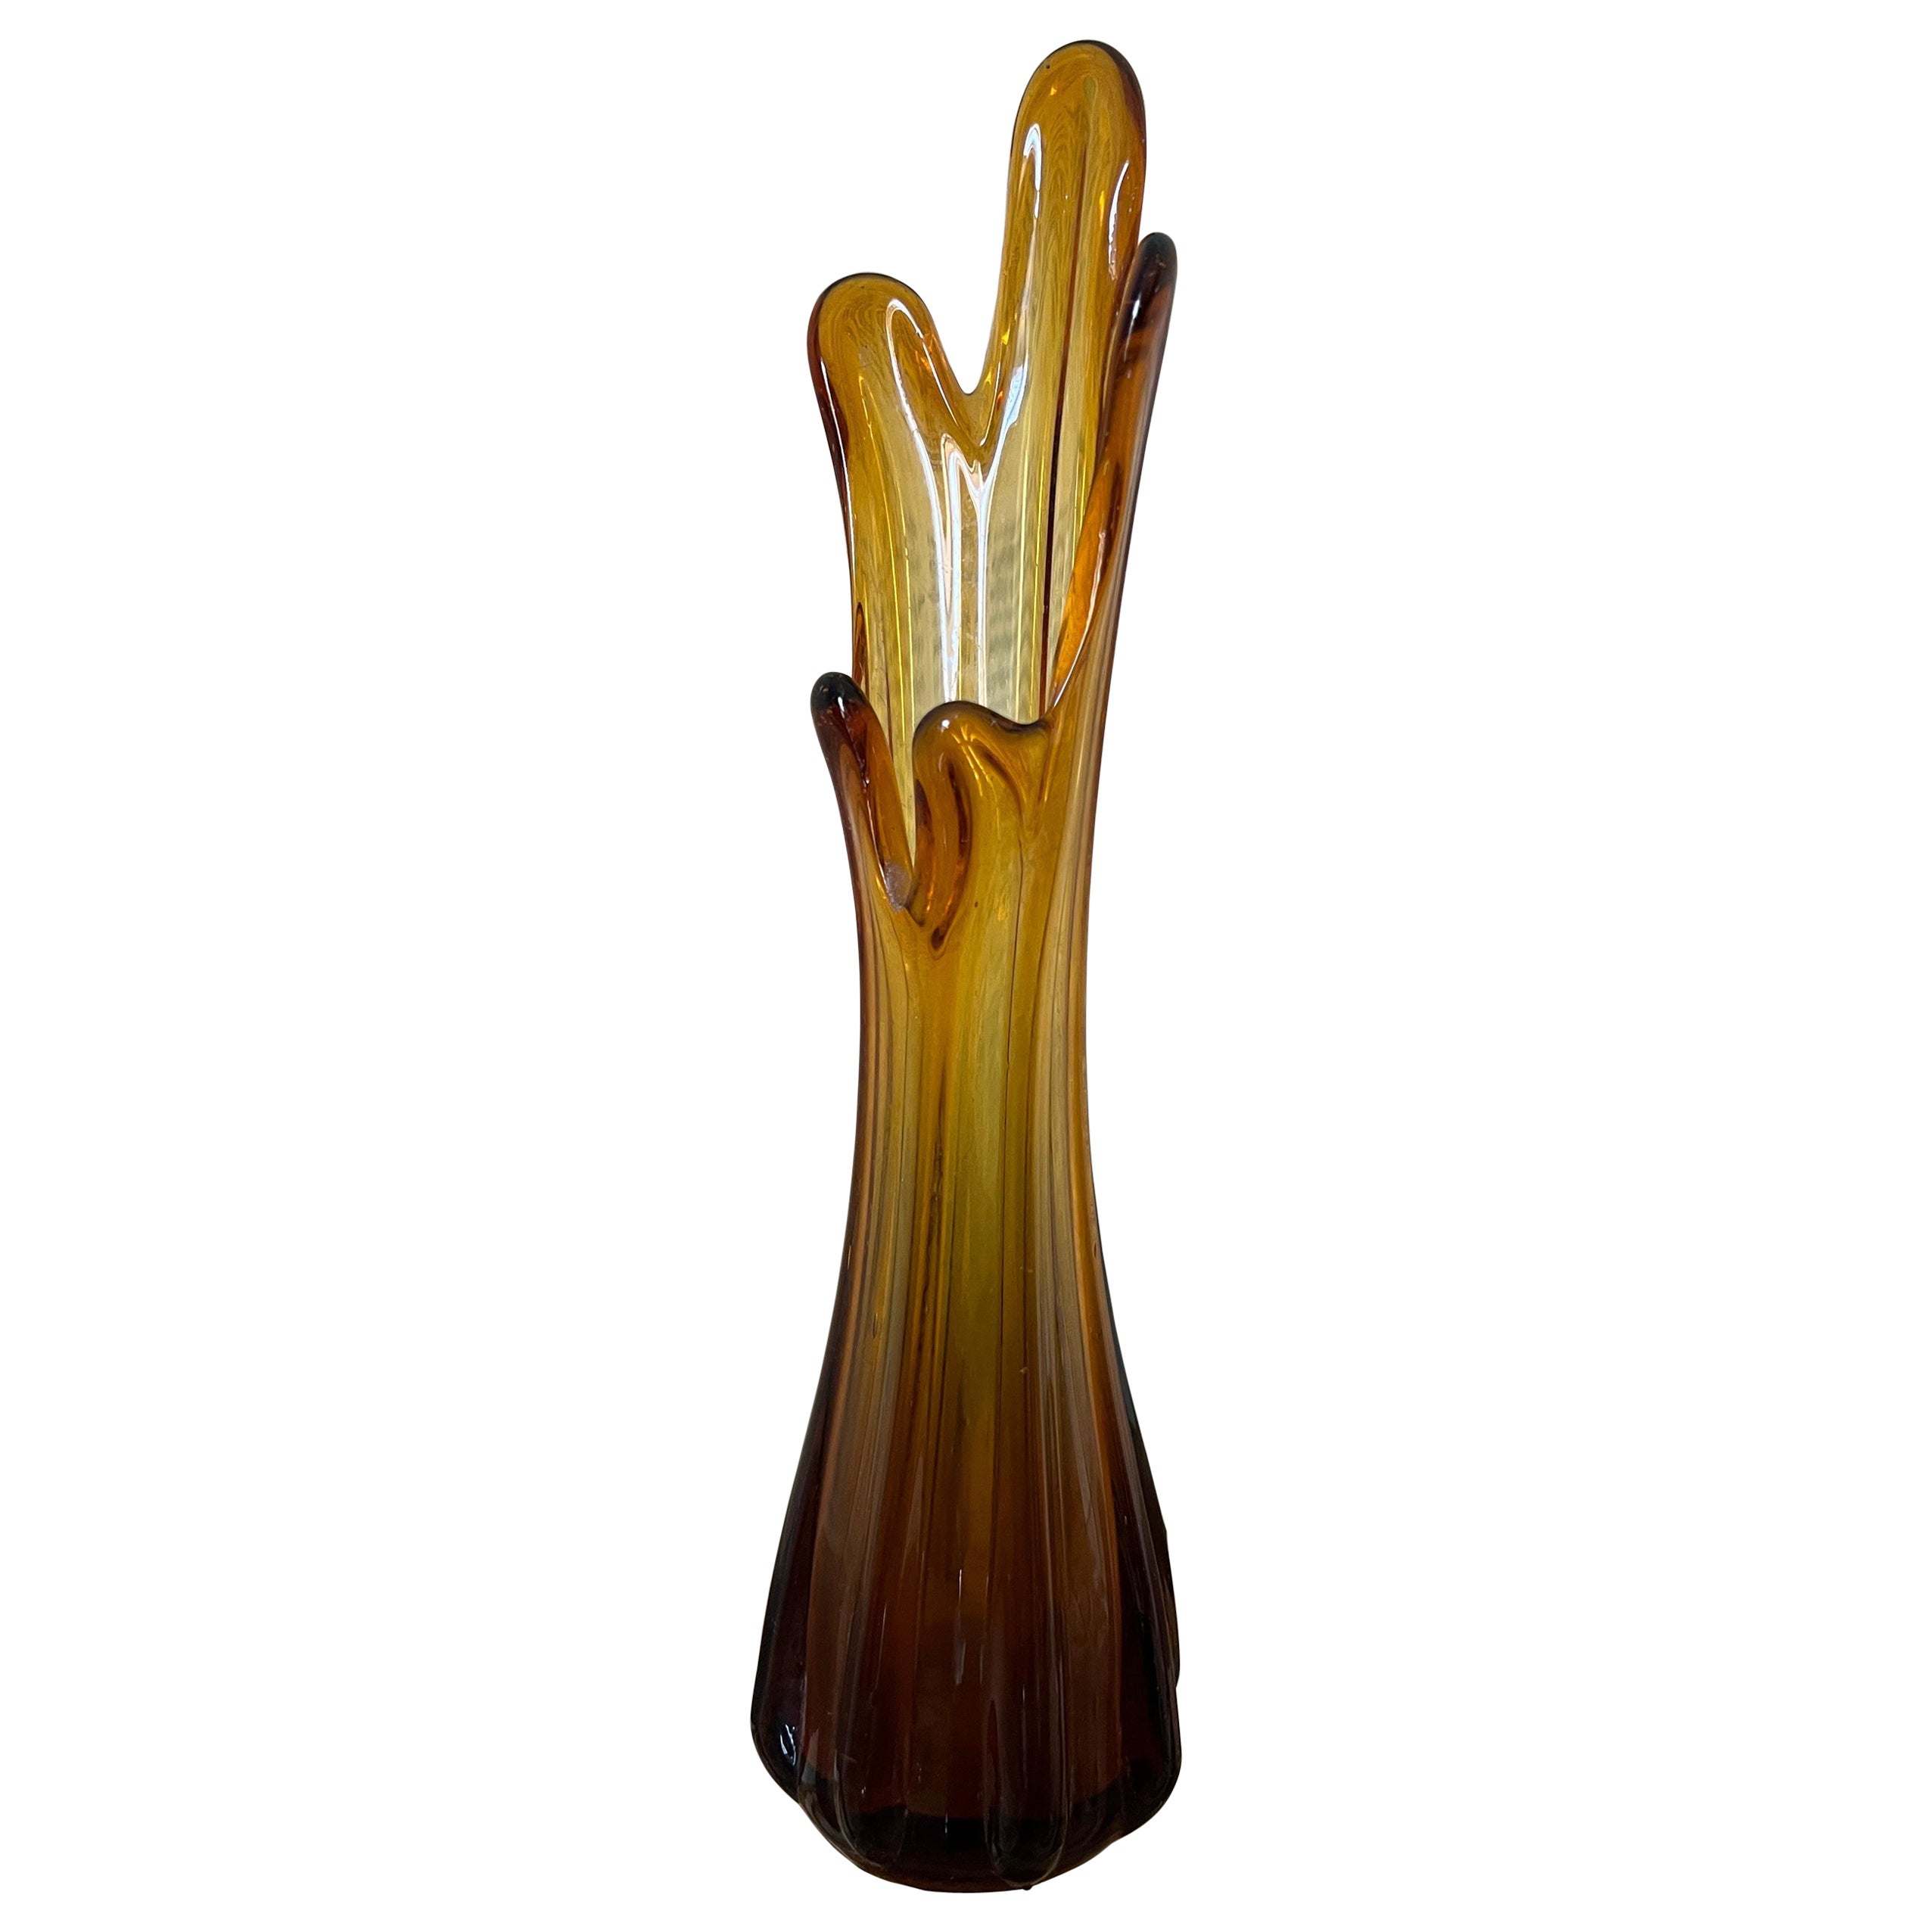  Vintage Murano Gallery Vases and Vessels